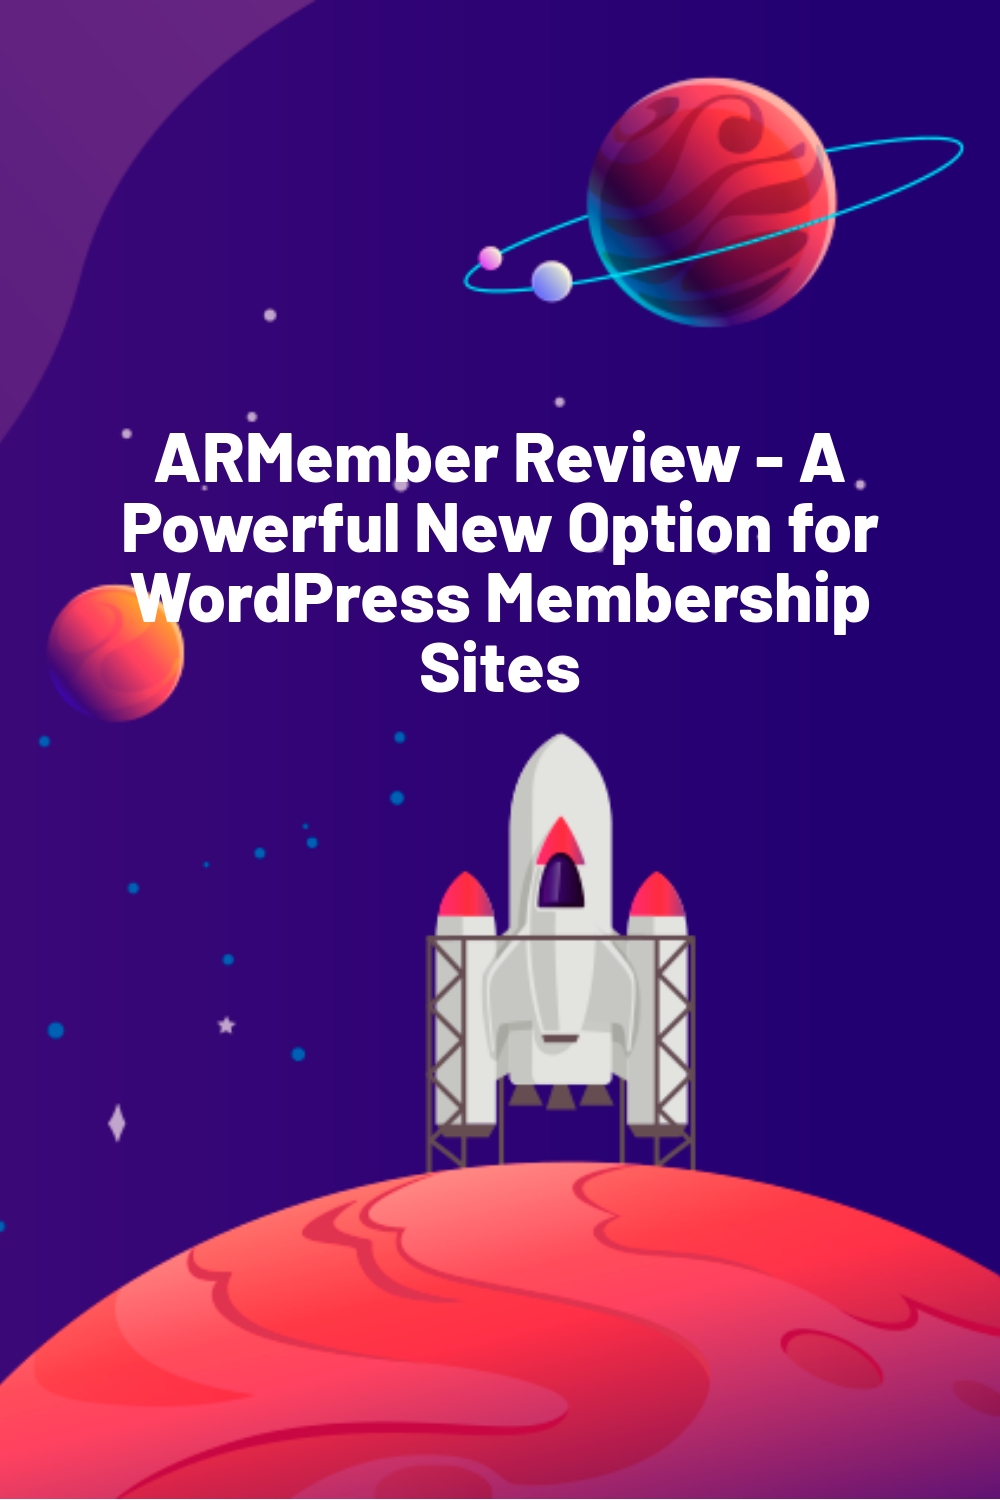 ARMember Review – A Powerful New Option for WordPress Membership Sites